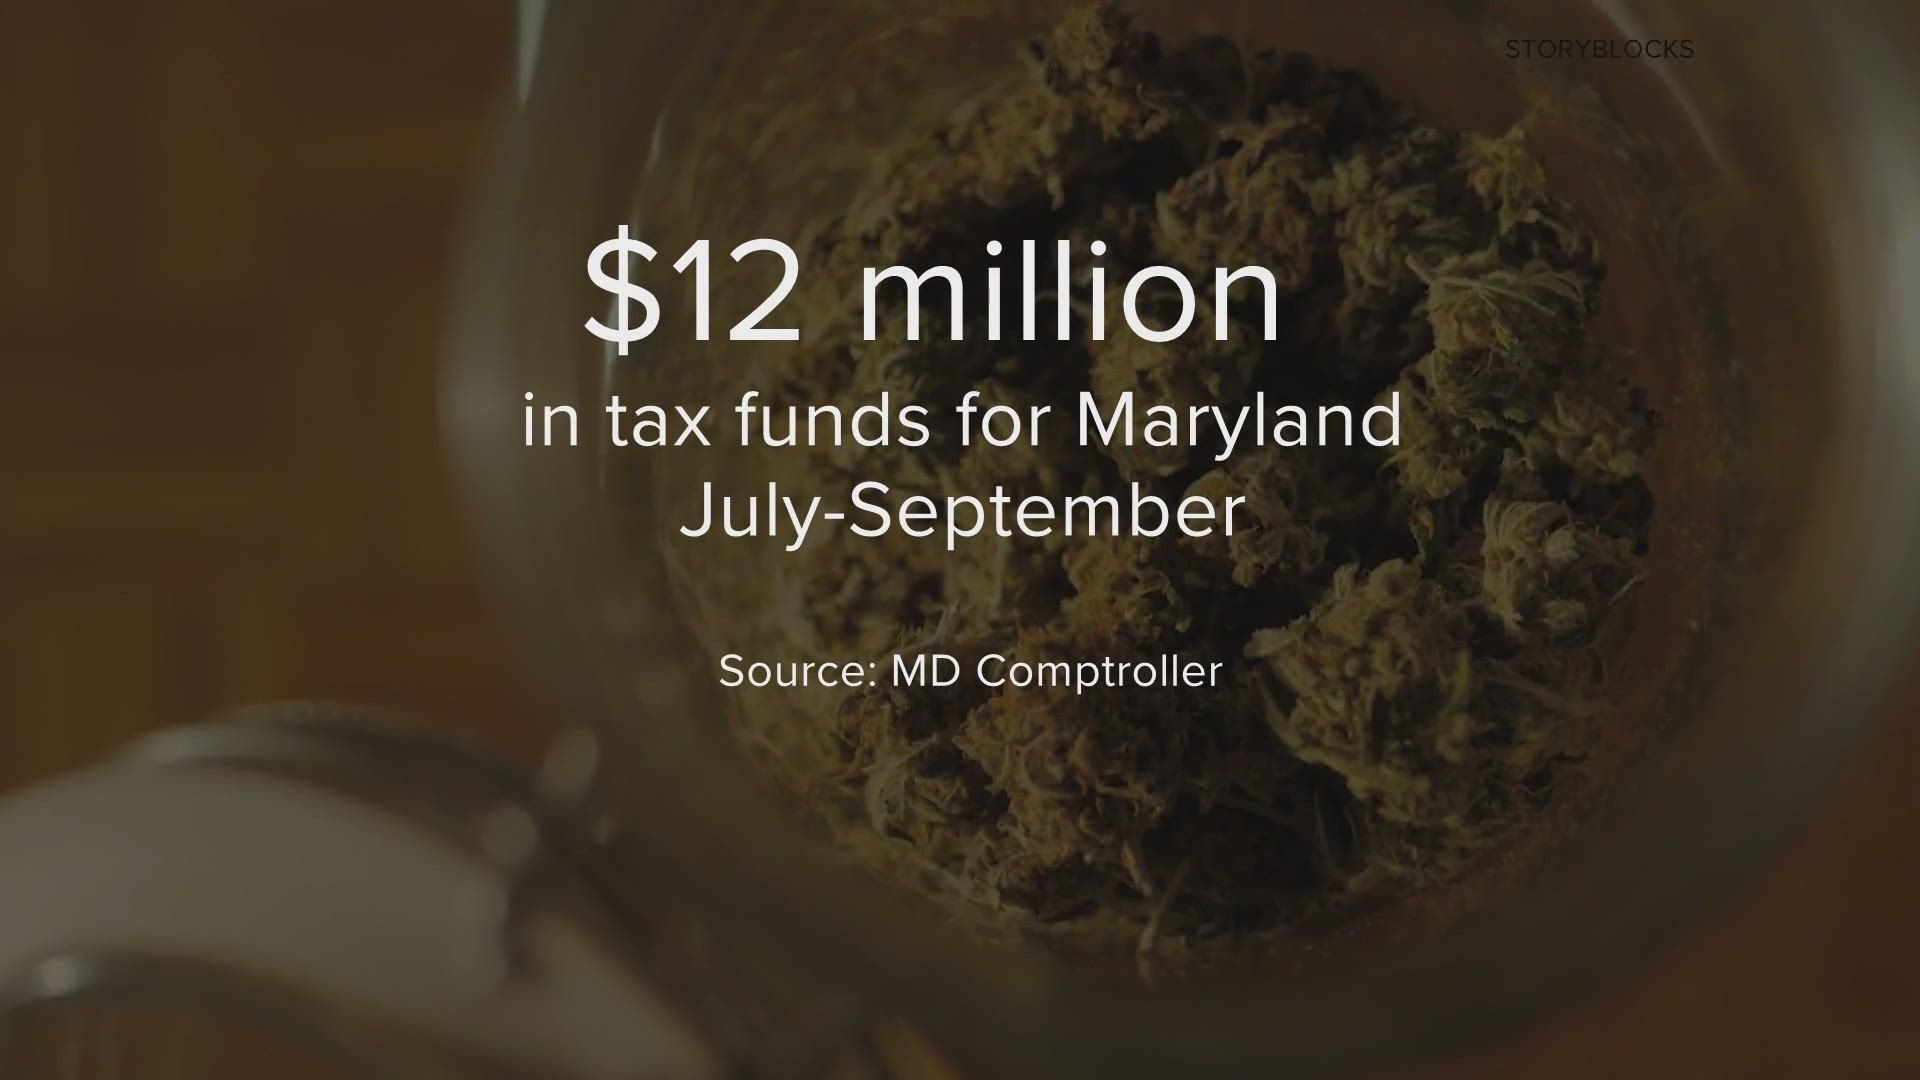 THE STATE'S FIRST QUARTERLY CANNABIS REPORTS SHOWS THAT IN THE FIRST THREE MONTHS, CUSTOMERS PAID OVER 12-MILLION DOLLARS IN TAXES TO THE STATE GOVERNMENT.